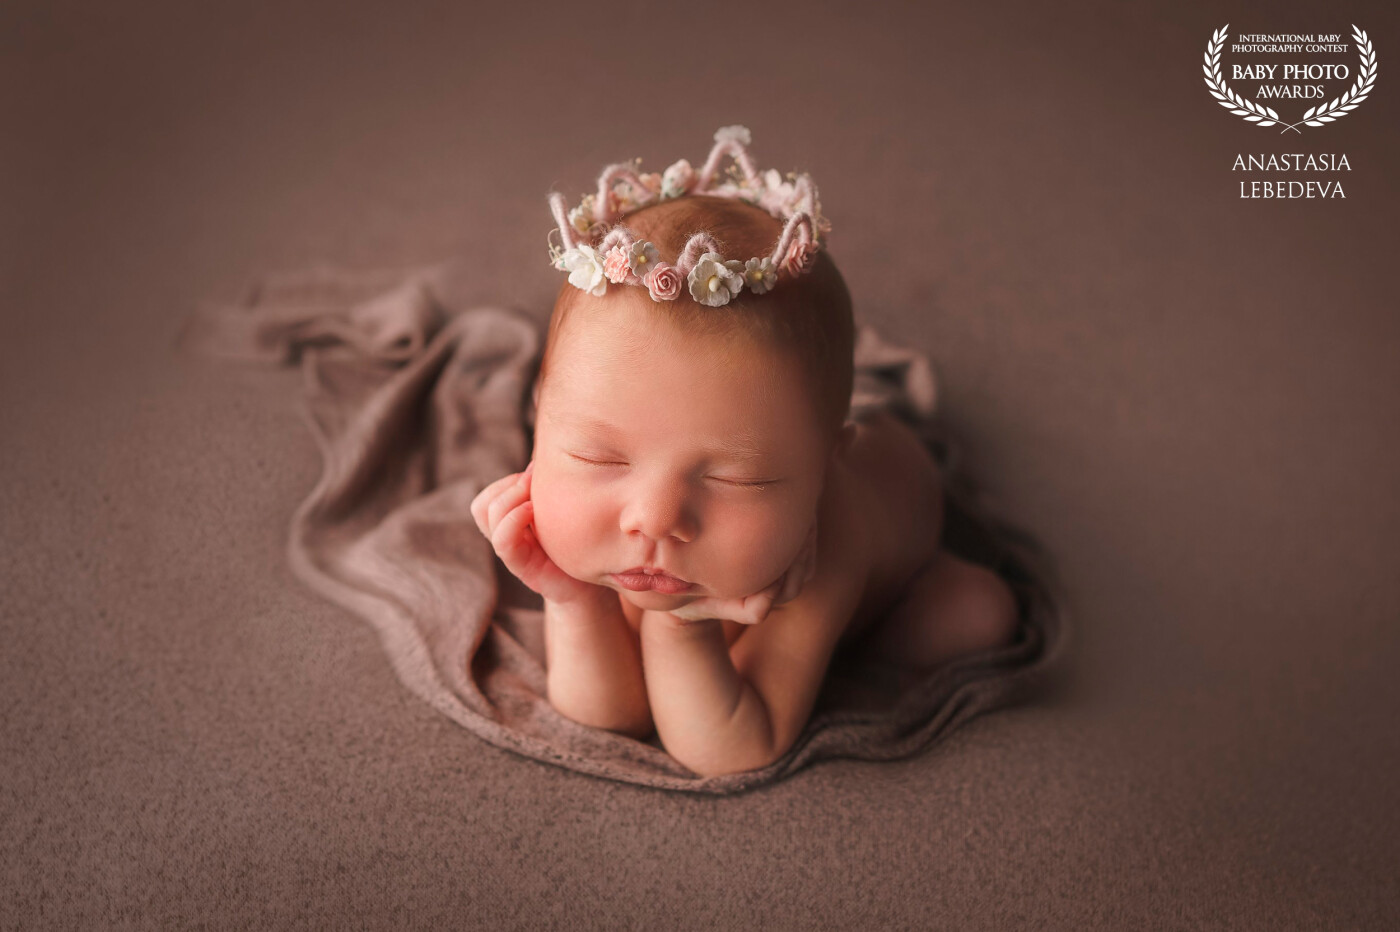 Hello everyone, I am very happy to introduce you little princess Emilia, who is only 10 days old. She slept so soundly that we did such a difficult pose without any problems. The baby's parents were happy that I made such an image.